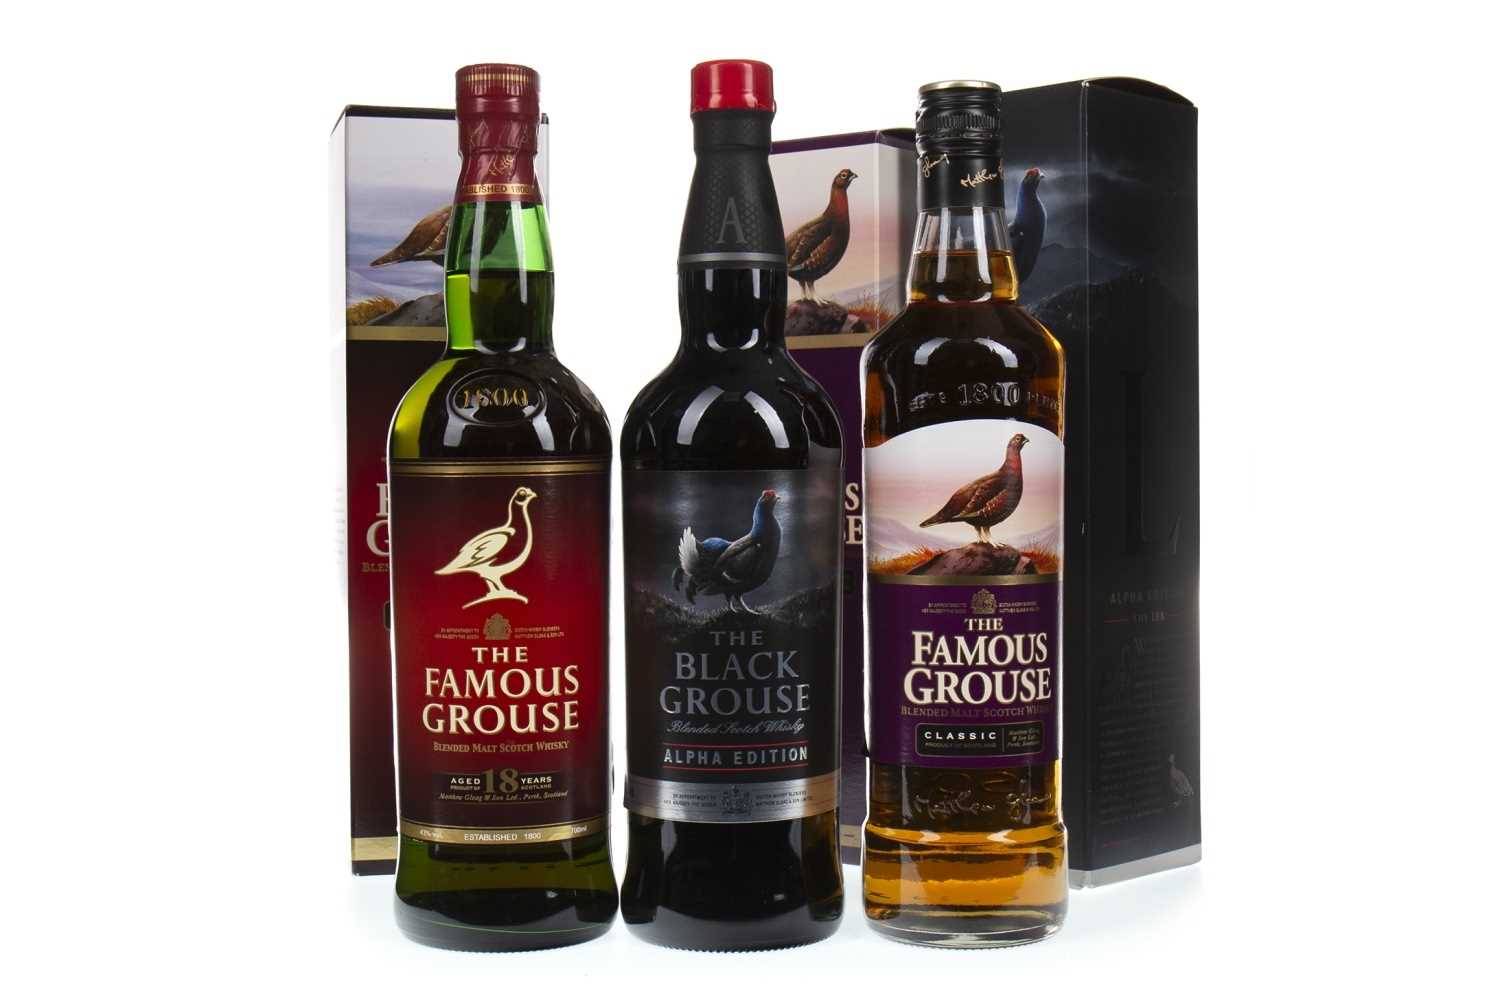 Lot 402 - FAMOUS GROUSE CLASSIC, AGED 18 YEARS AND THE BLACK GROUSE ALPHA EDITION